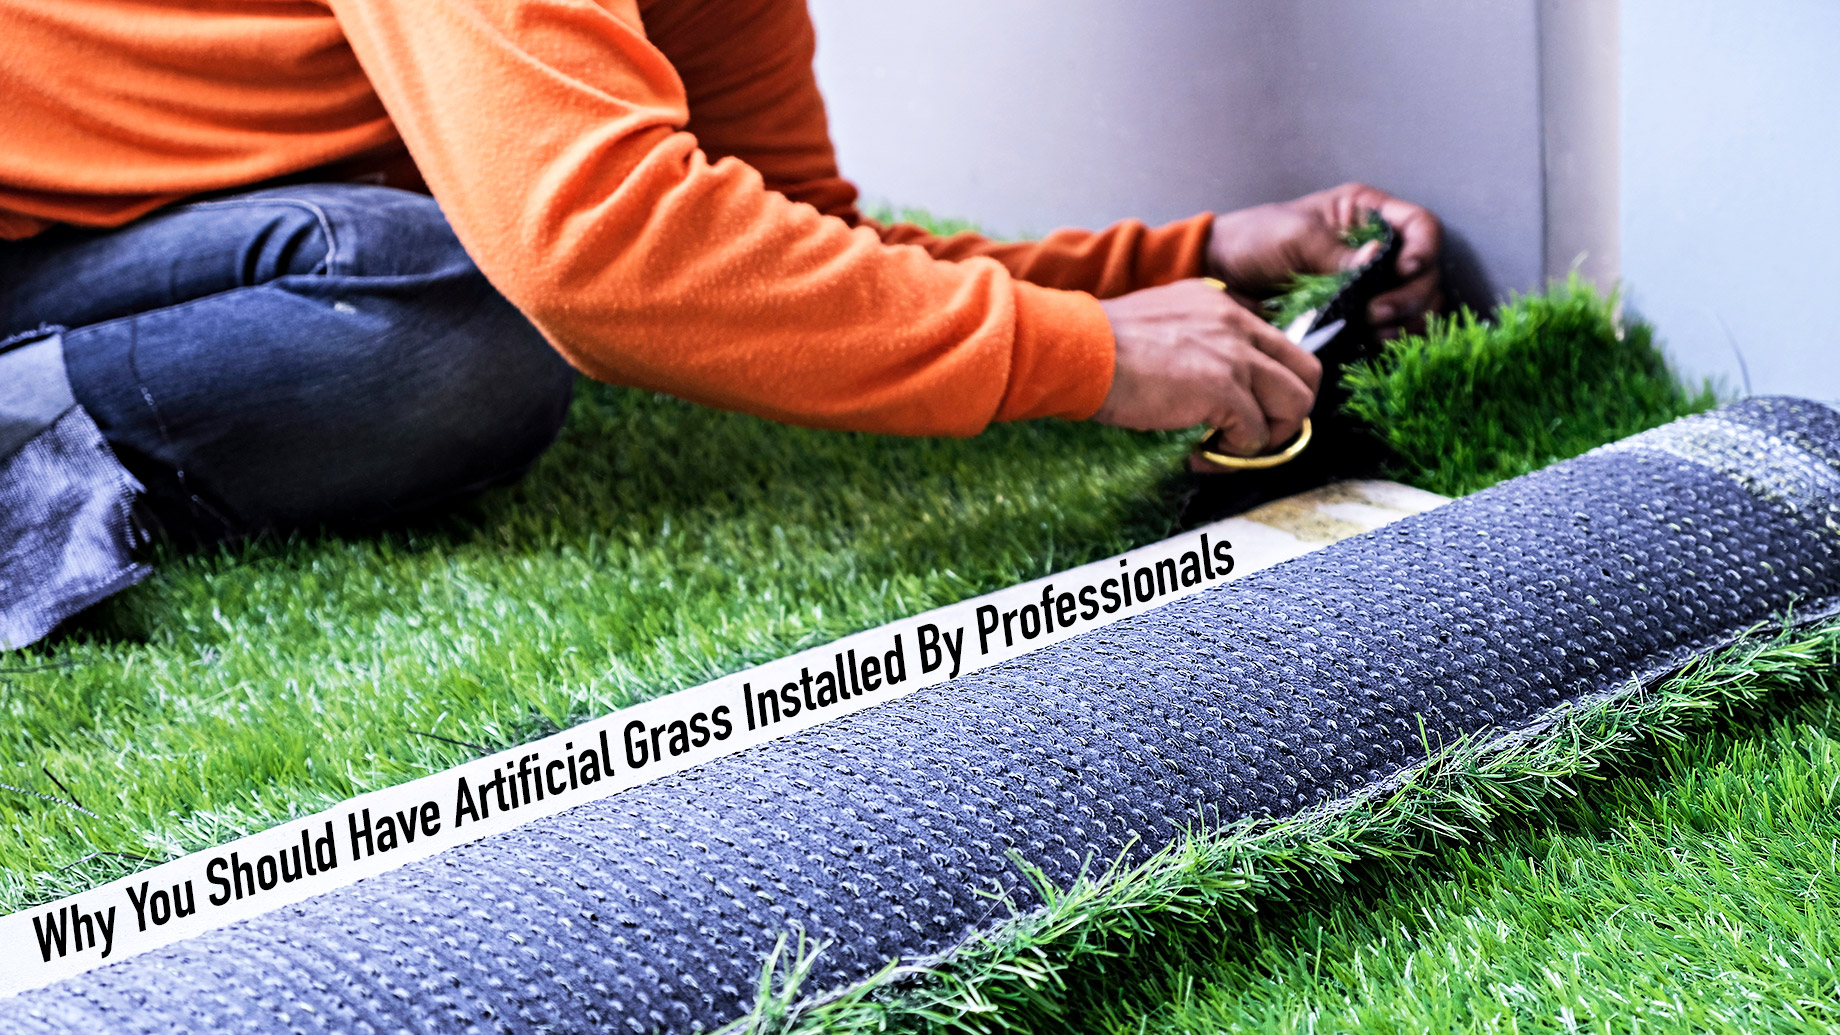 Why You Should Have Artificial Grass Installed By Professionals